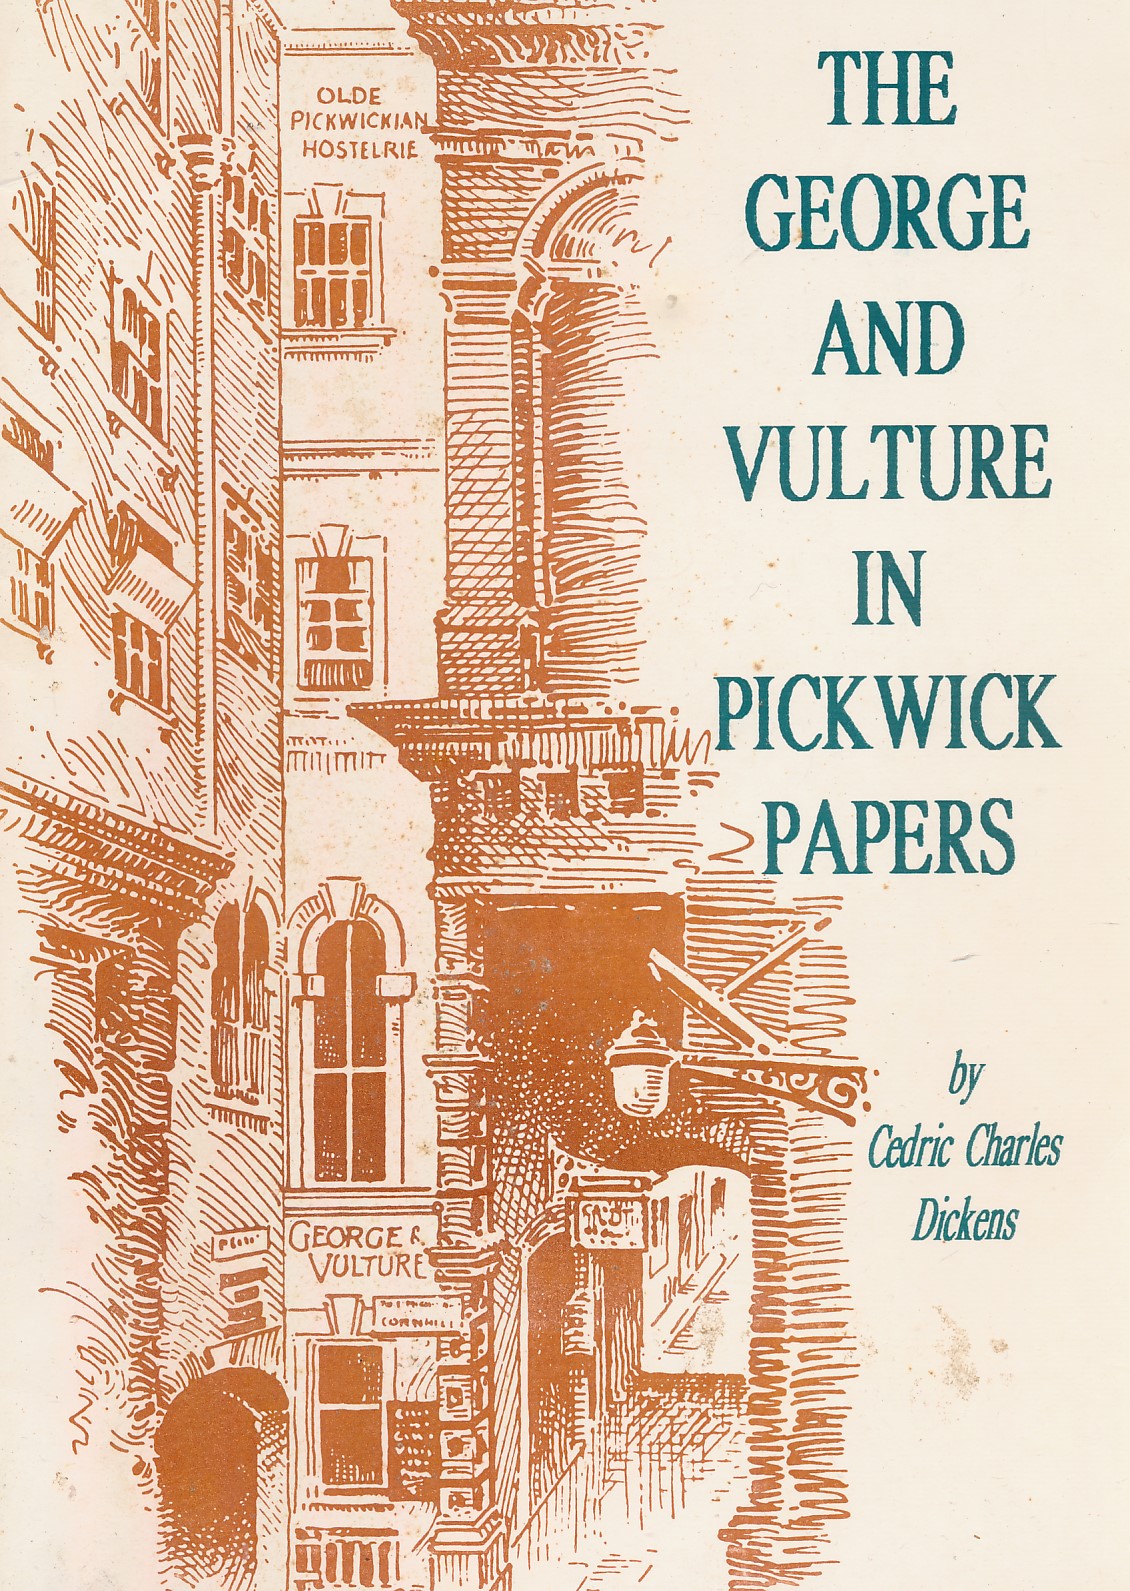 The George and Vulture in Pickwick Papers. Signed copy.